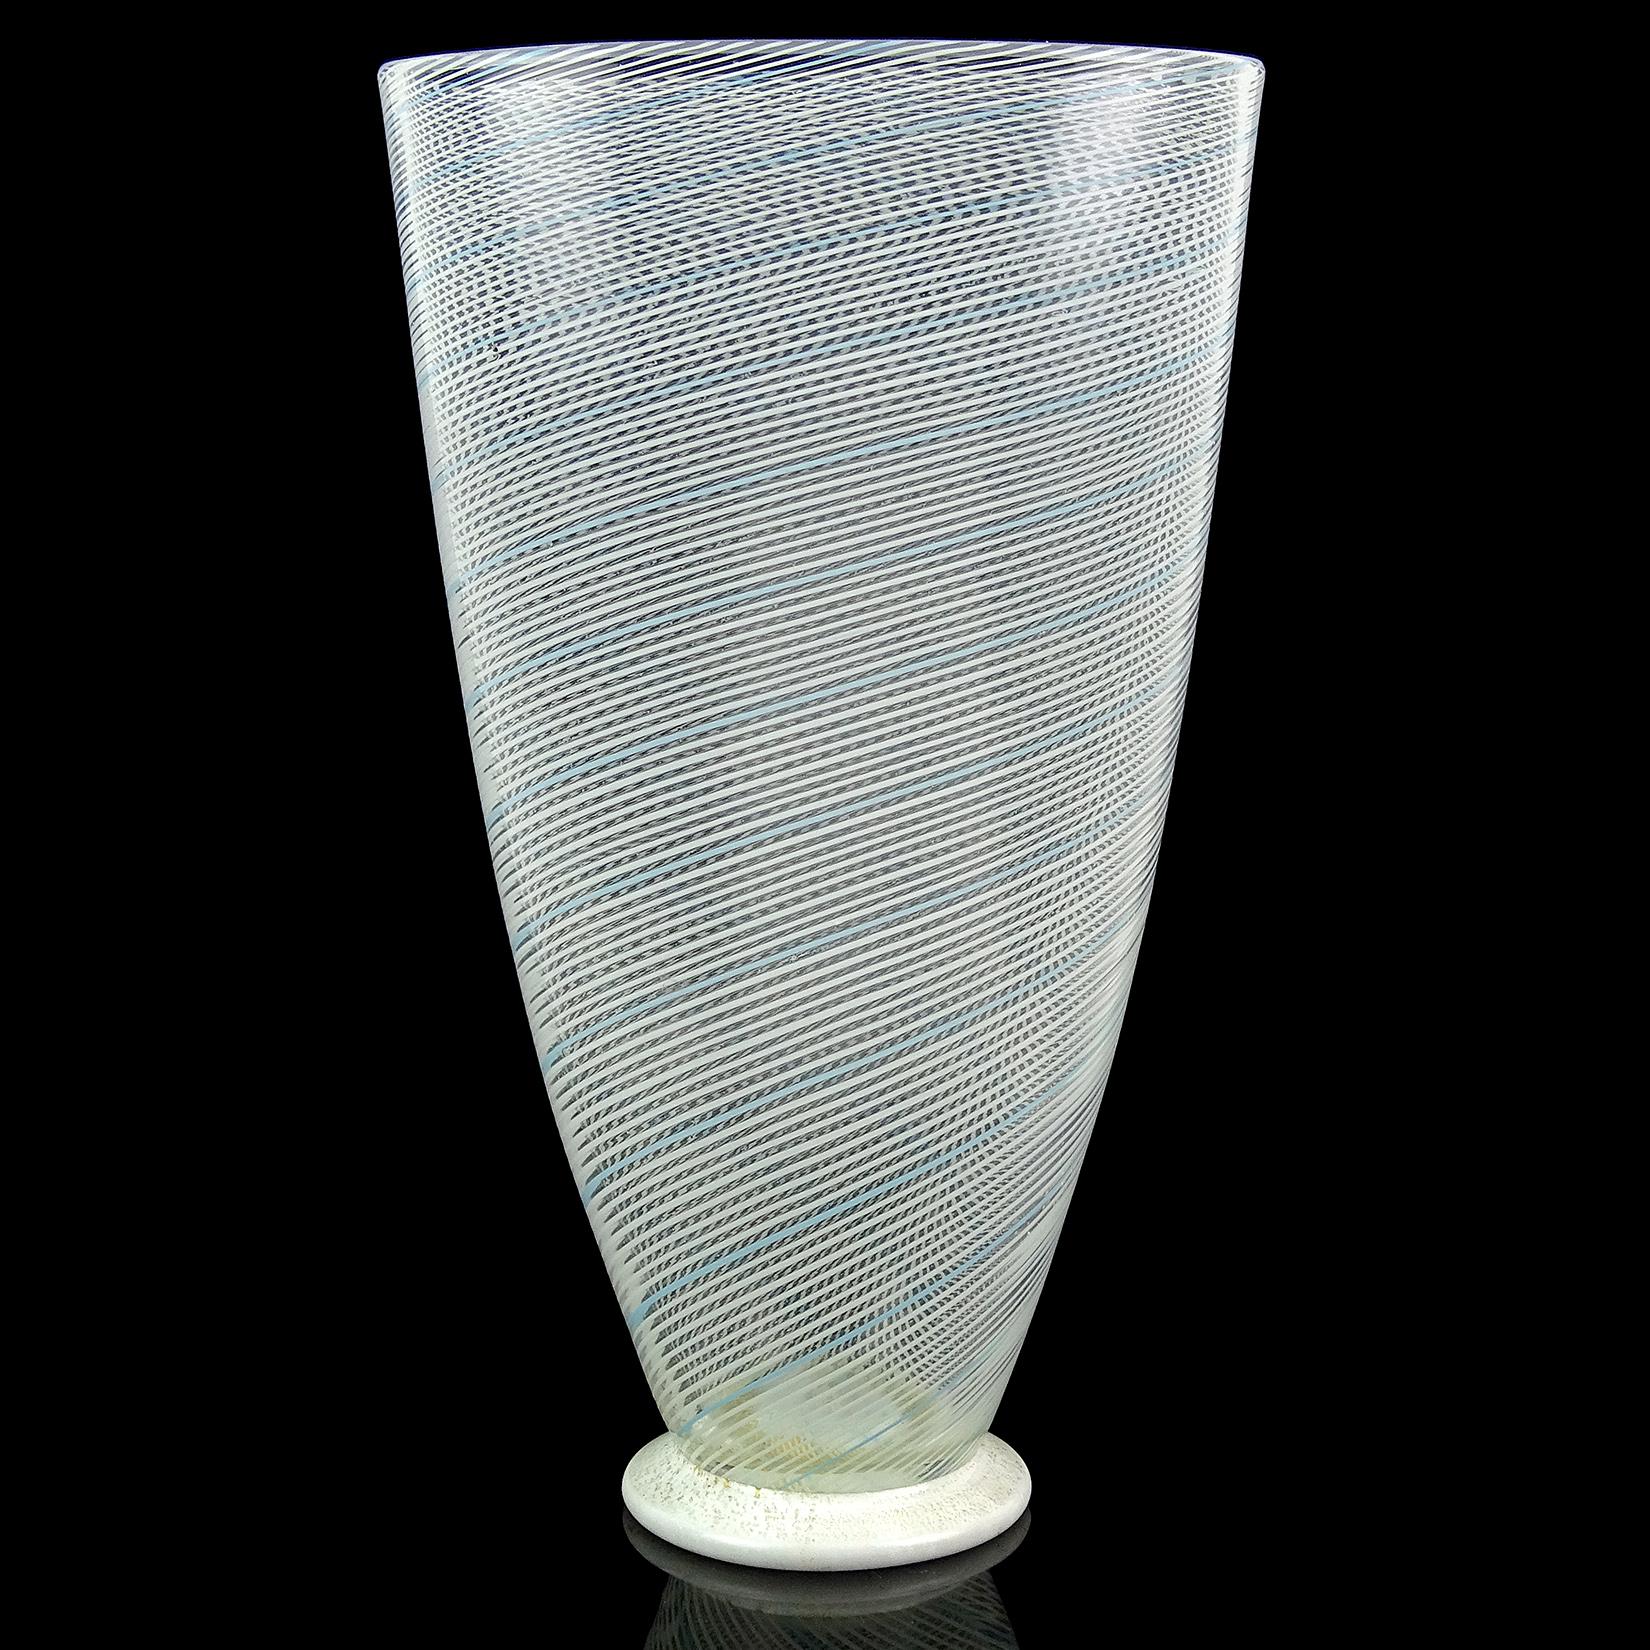 Beautiful vintage Murano hand blown blue and white Filigrana ribbons Italian art glass flower vase. Documented to designer Dino Martens for the Aureliano Toso Company. Dated to the 1950s, with original label underneath. Published as Model 2882 in